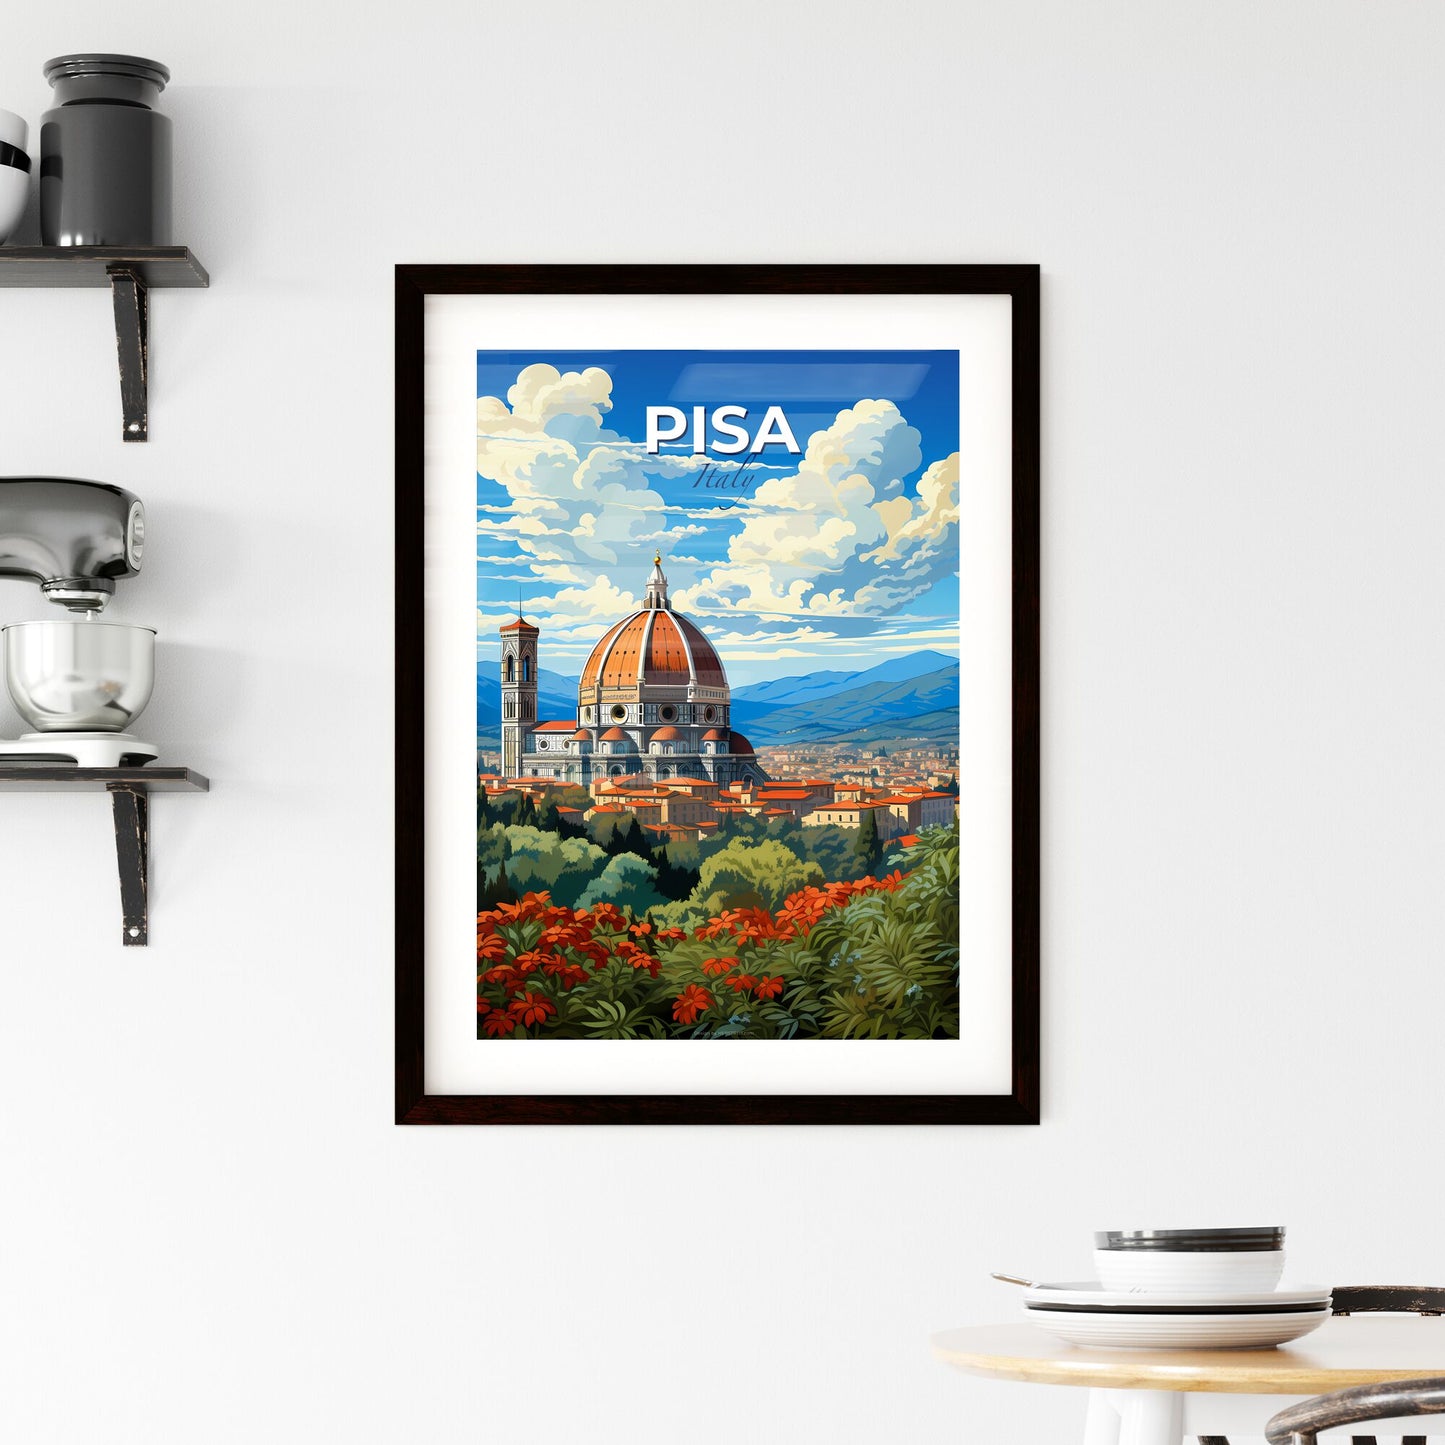 Pisa, Italy, A Poster of a building with a dome and a city landscape Default Title